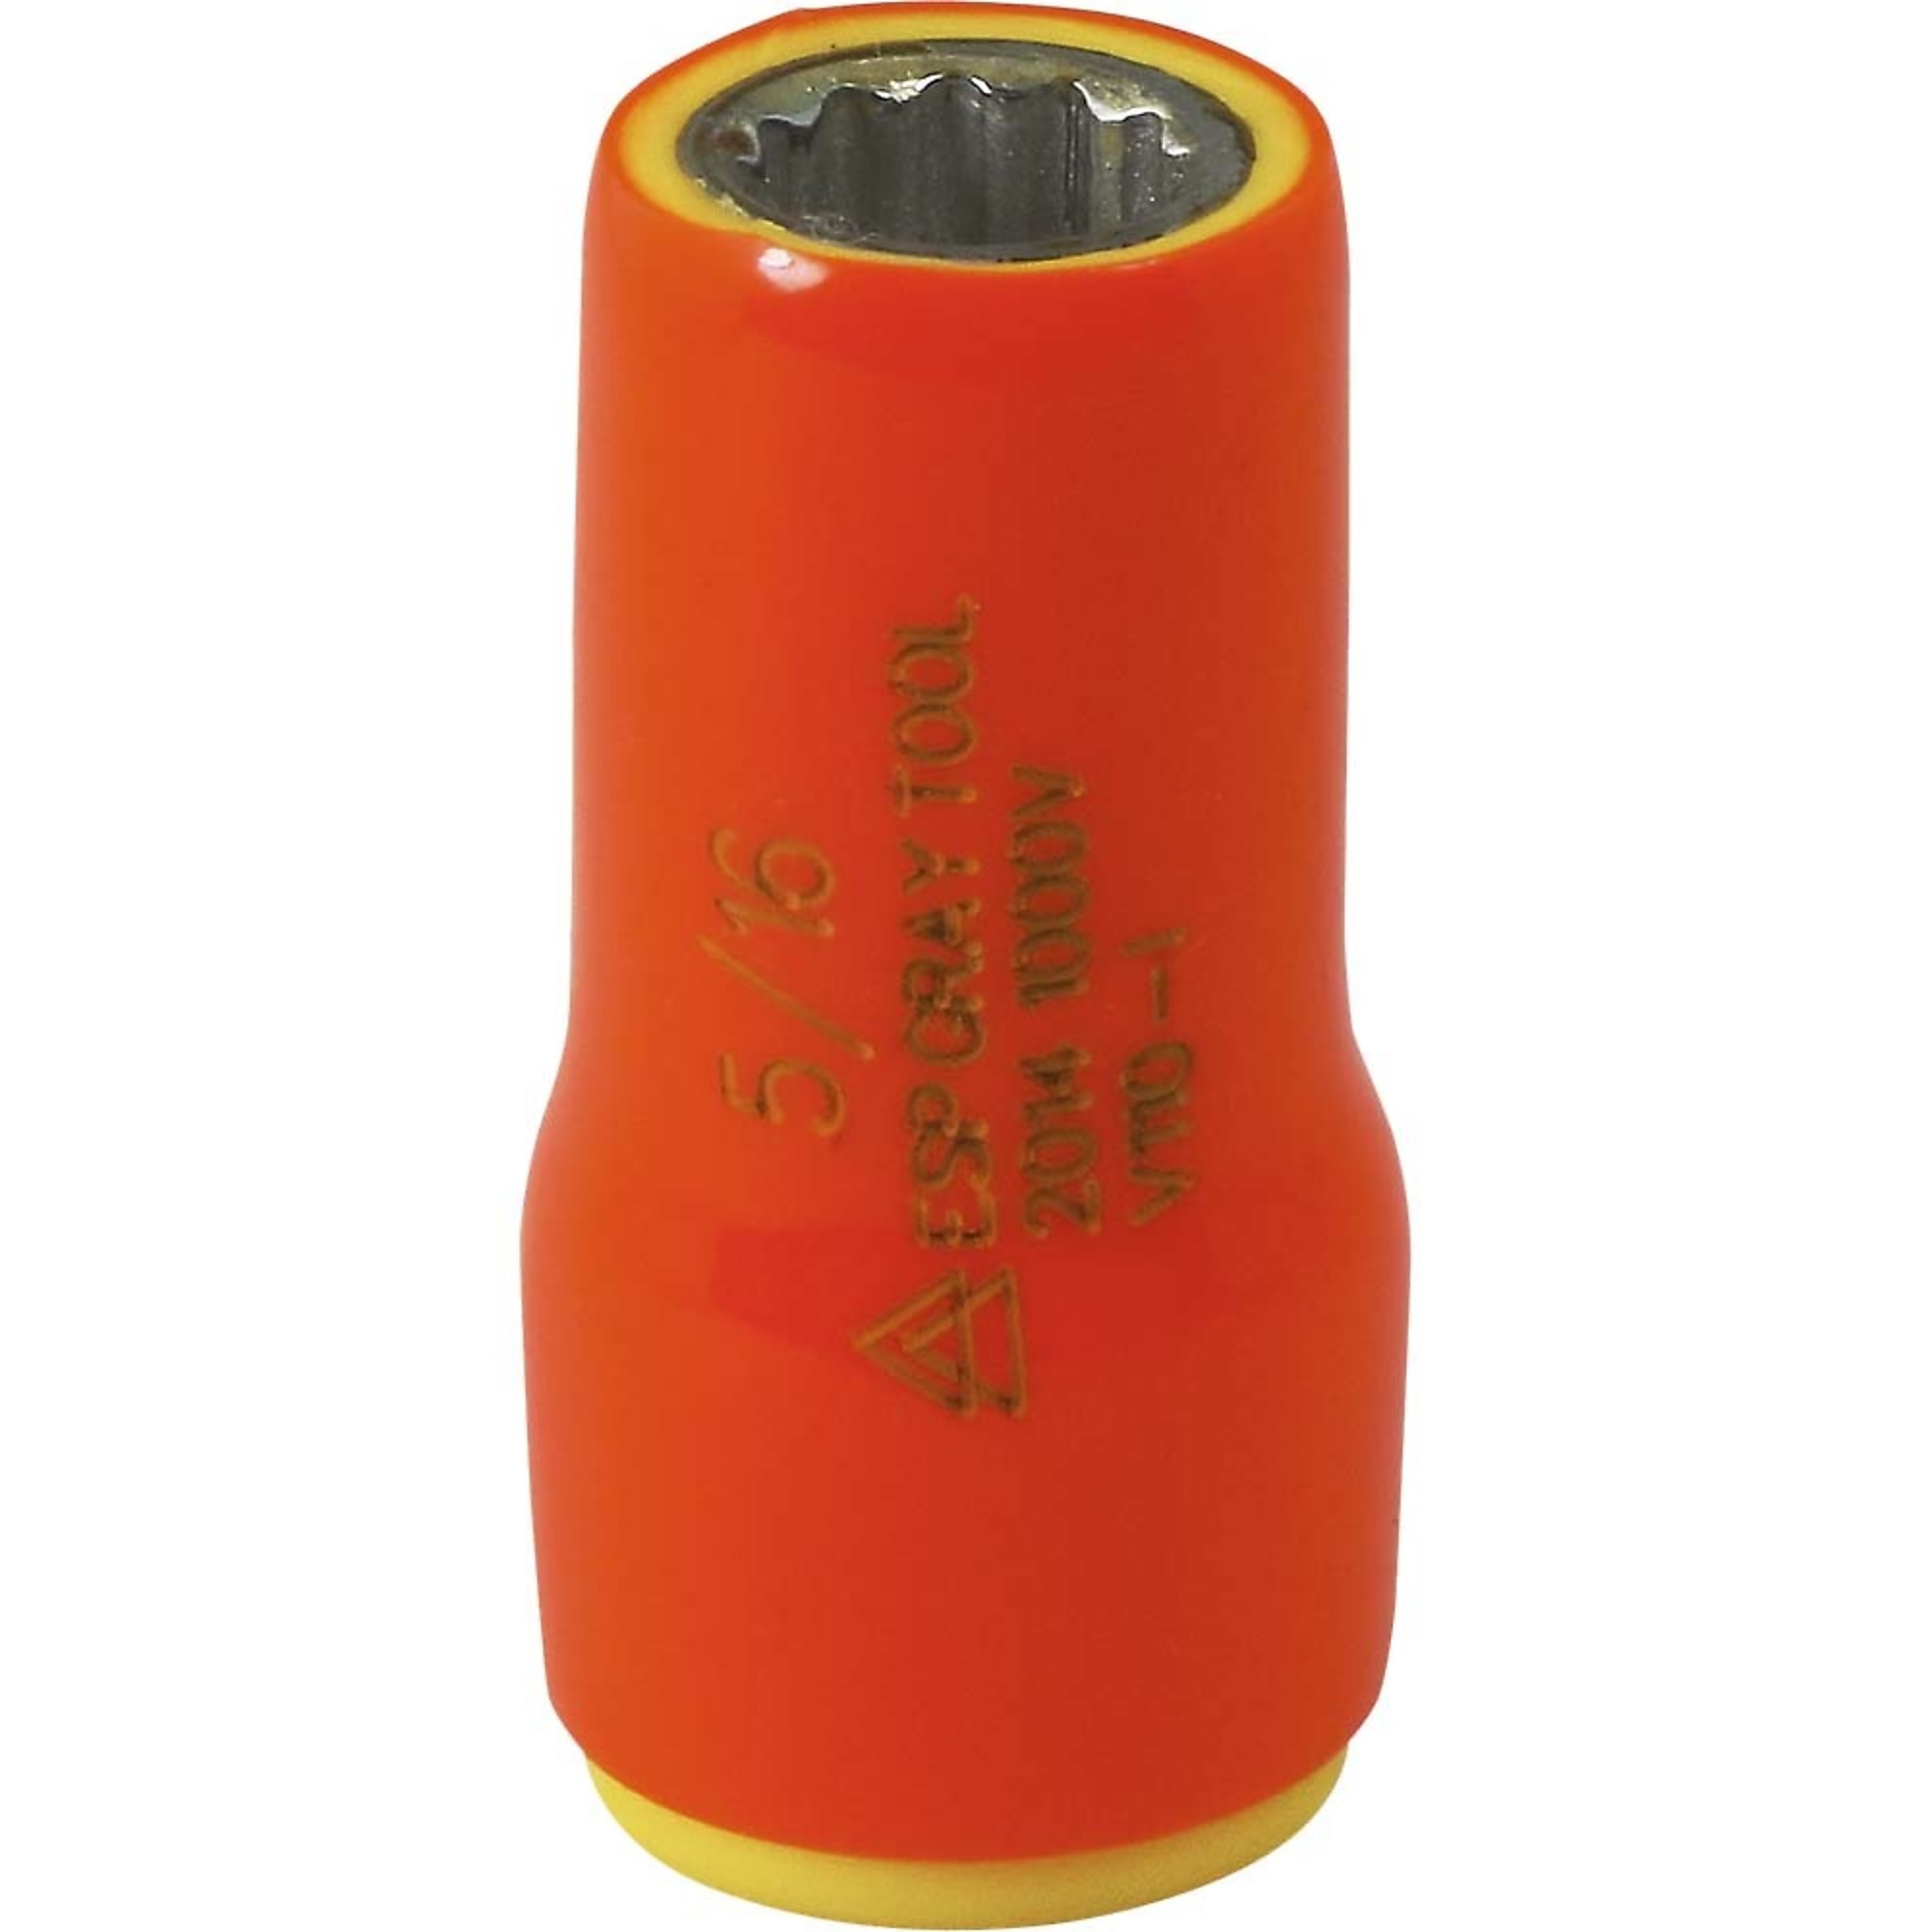 Gray Tools, 5/16Inch X 1/4Inch Drive Socket 1000V Insulated, Socket Size 5/16 in, Drive Size 1/4 in, Model V110-I